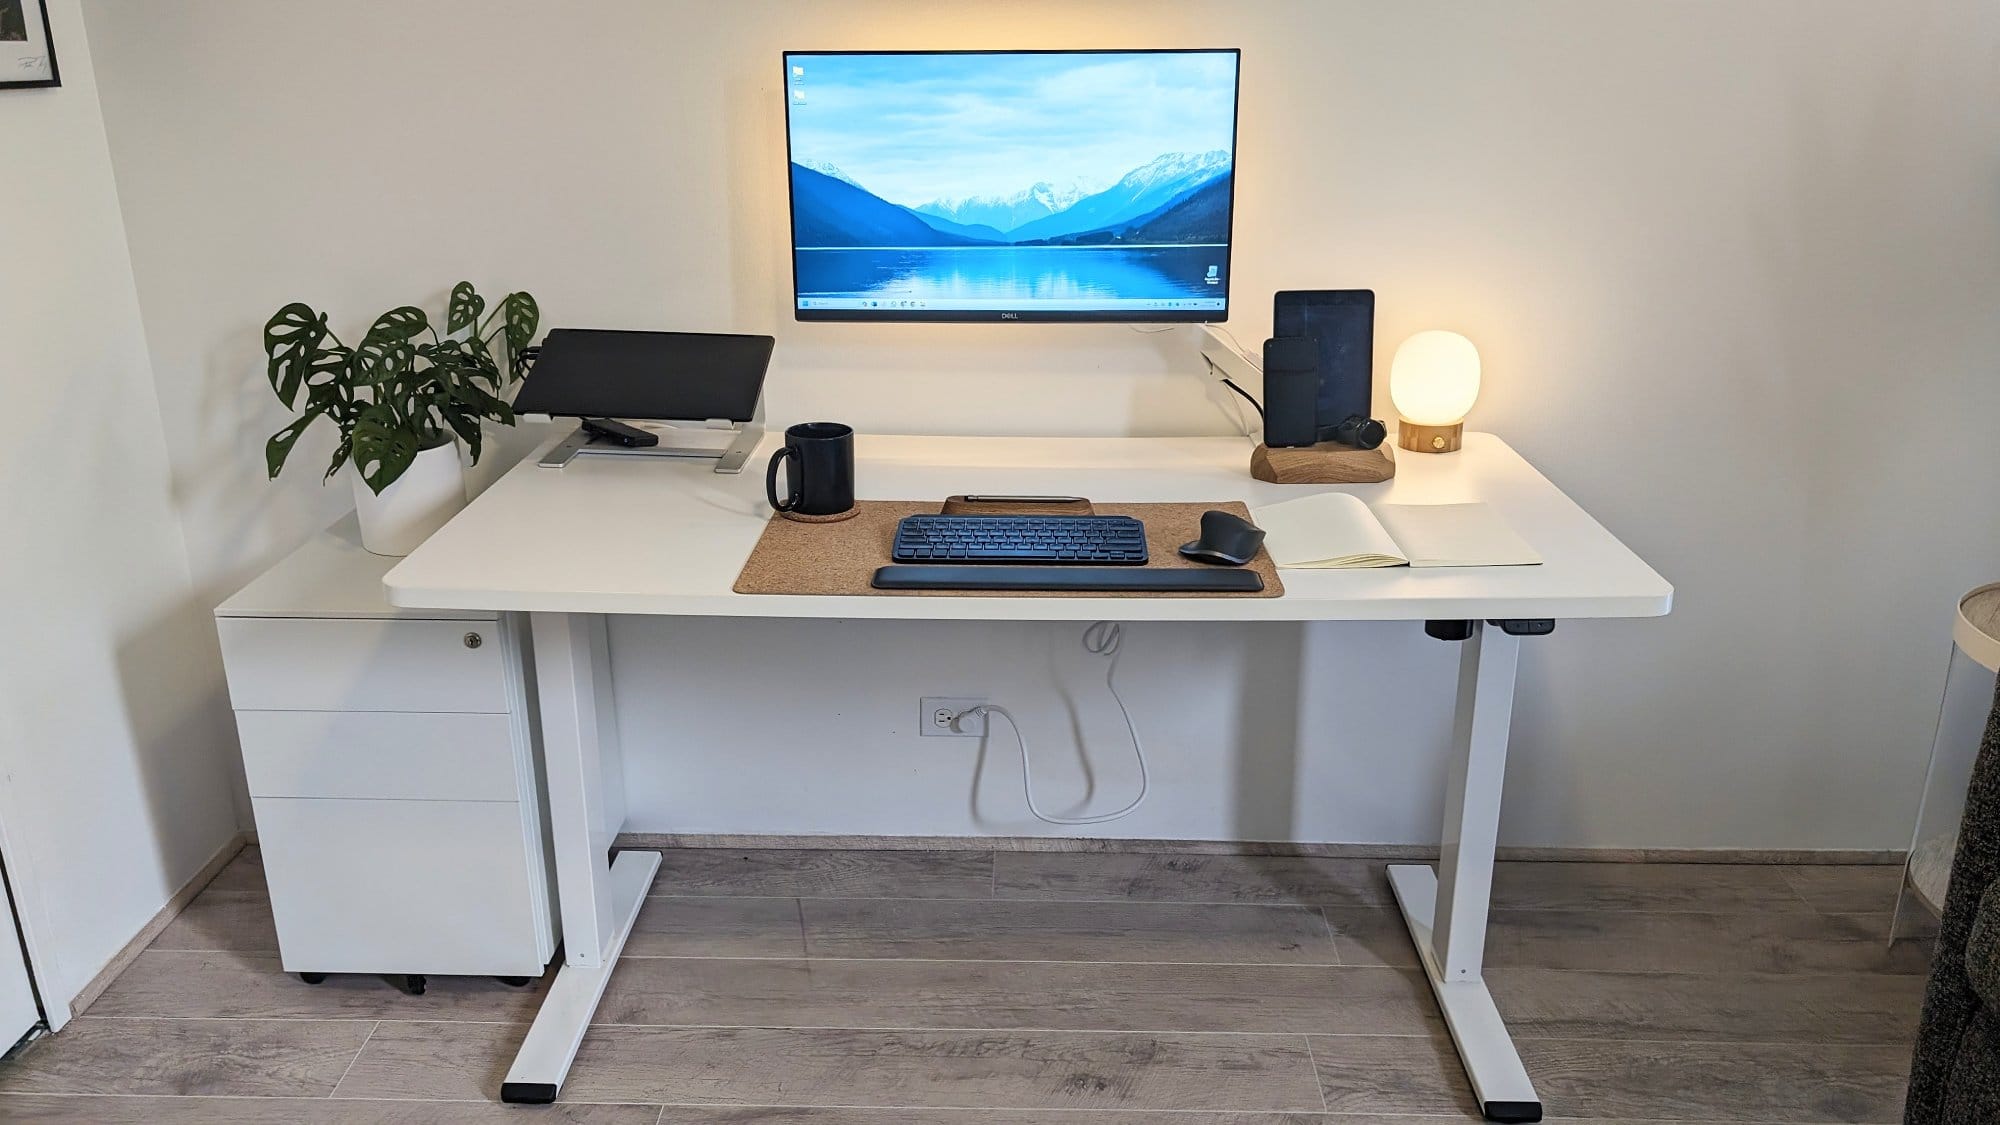 A home office setup featuring a standing desk with a dual-monitor arrangement, a keyboard and mouse on a cork mat, a mug, a notebook, a spherical lamp, and a monstera plant